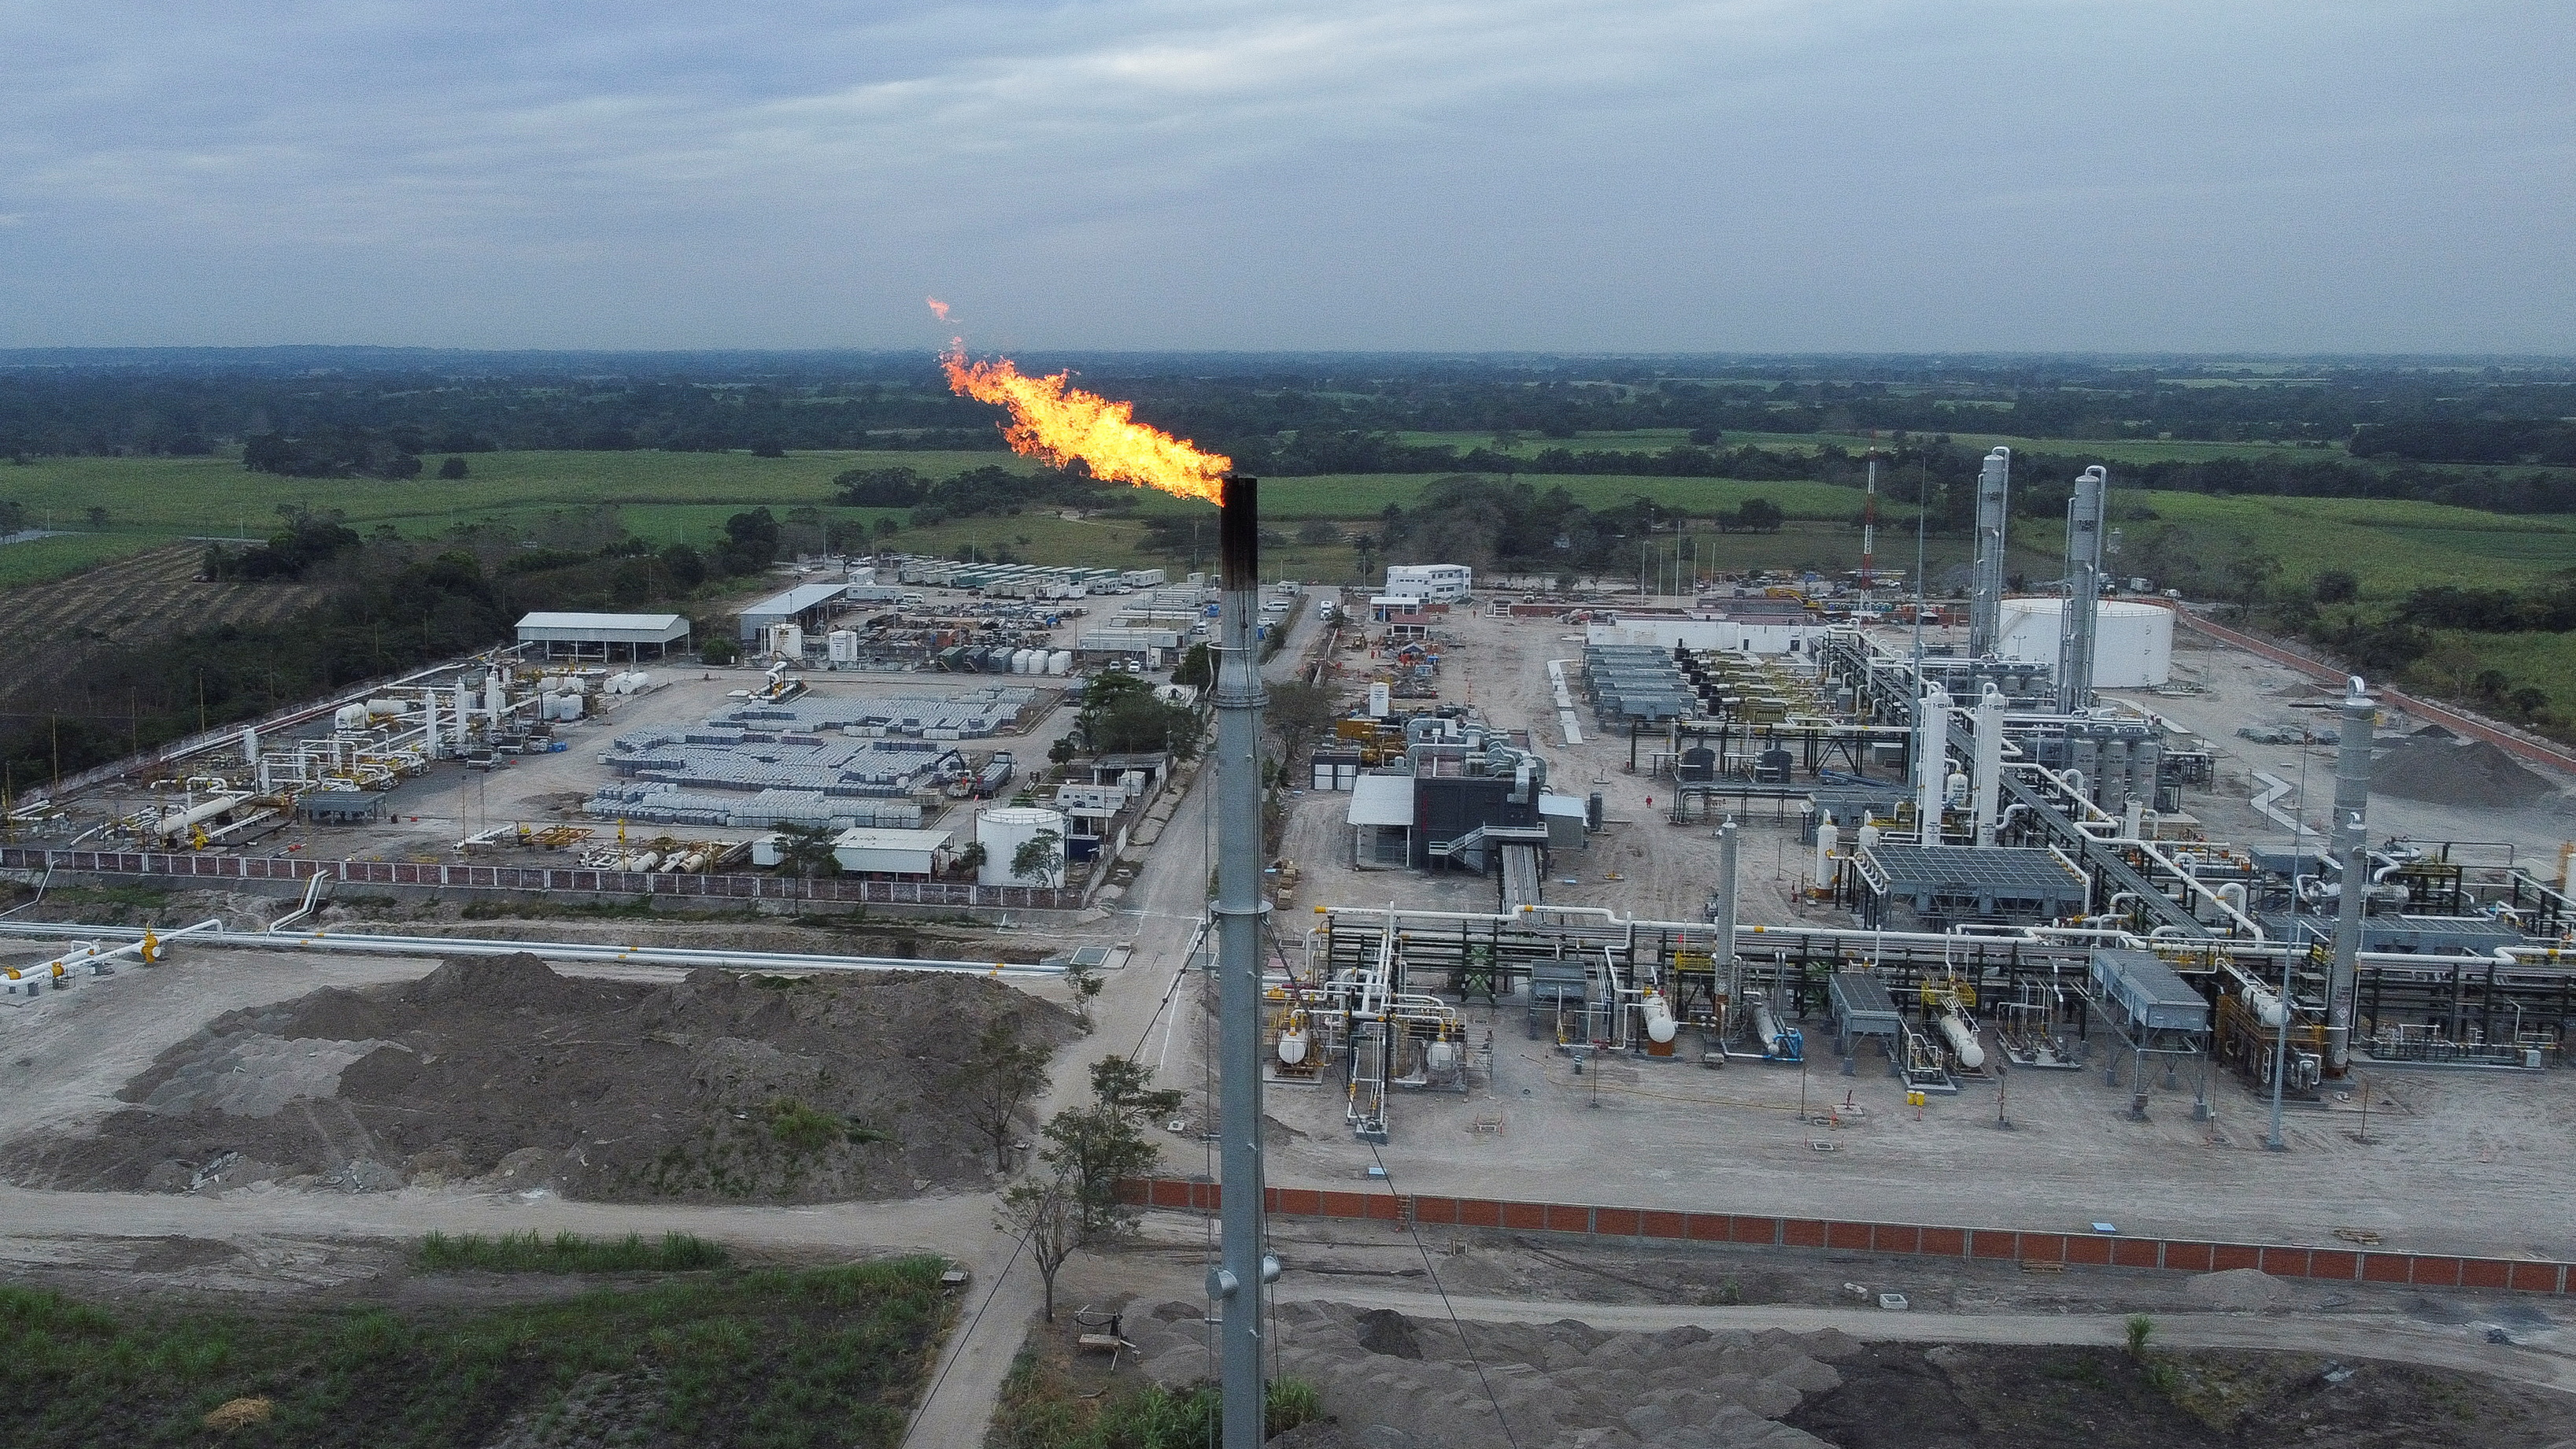 Gas flares are seen at the state energy company Petroleos Mexicanos (Pemex) plants in Veracruz state